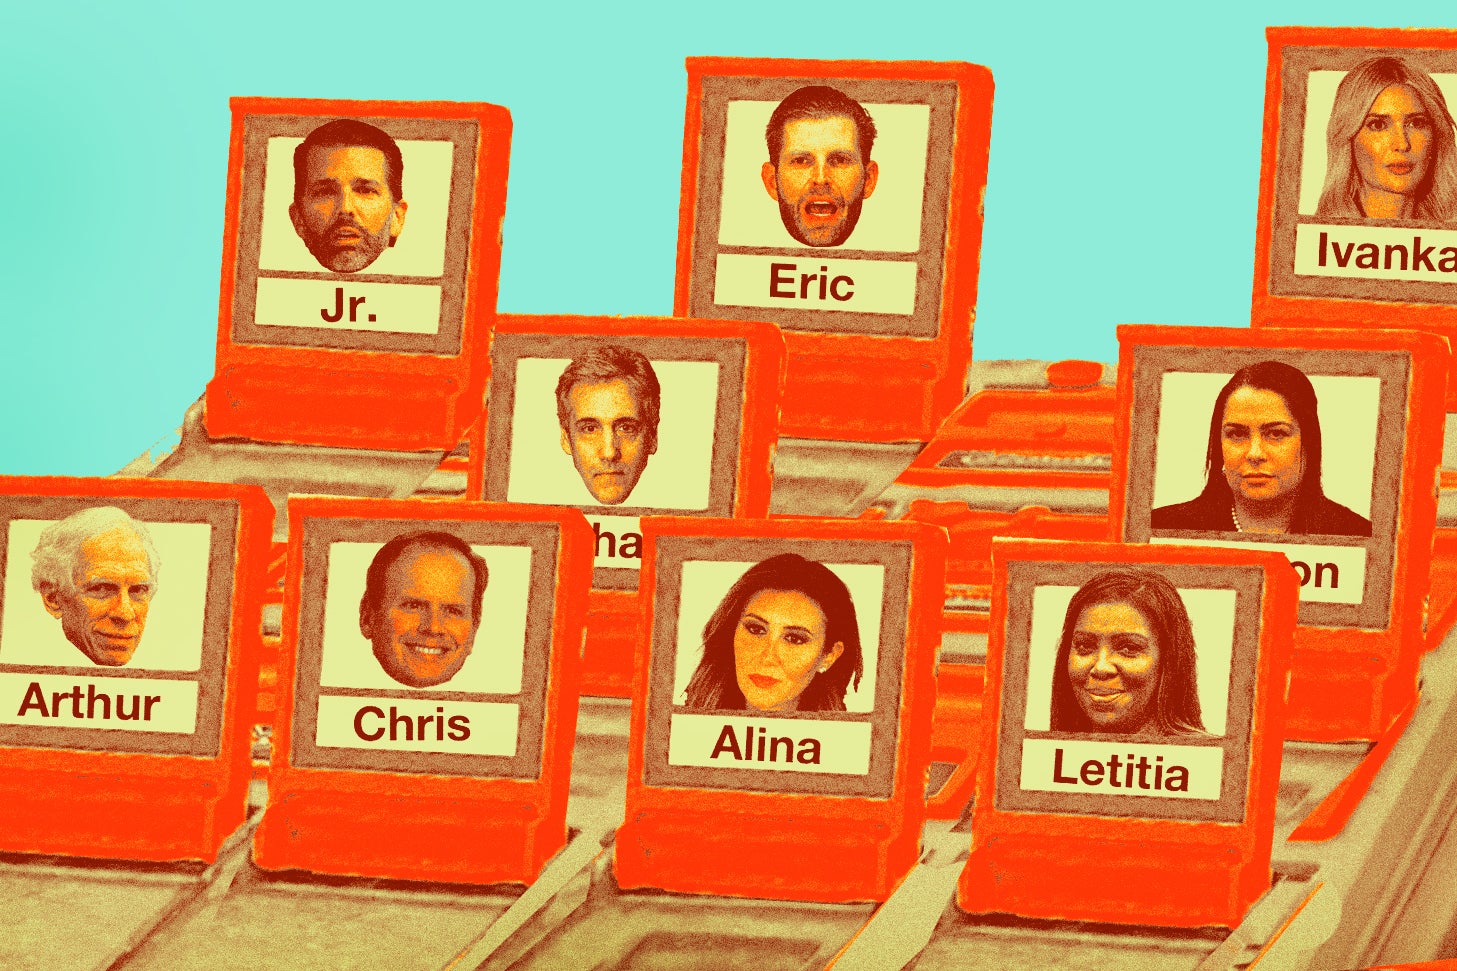 An illustration of a Guess Who?–style game where the people depicted on the cards are people who played a role in Trump's New York civil fraud trial.